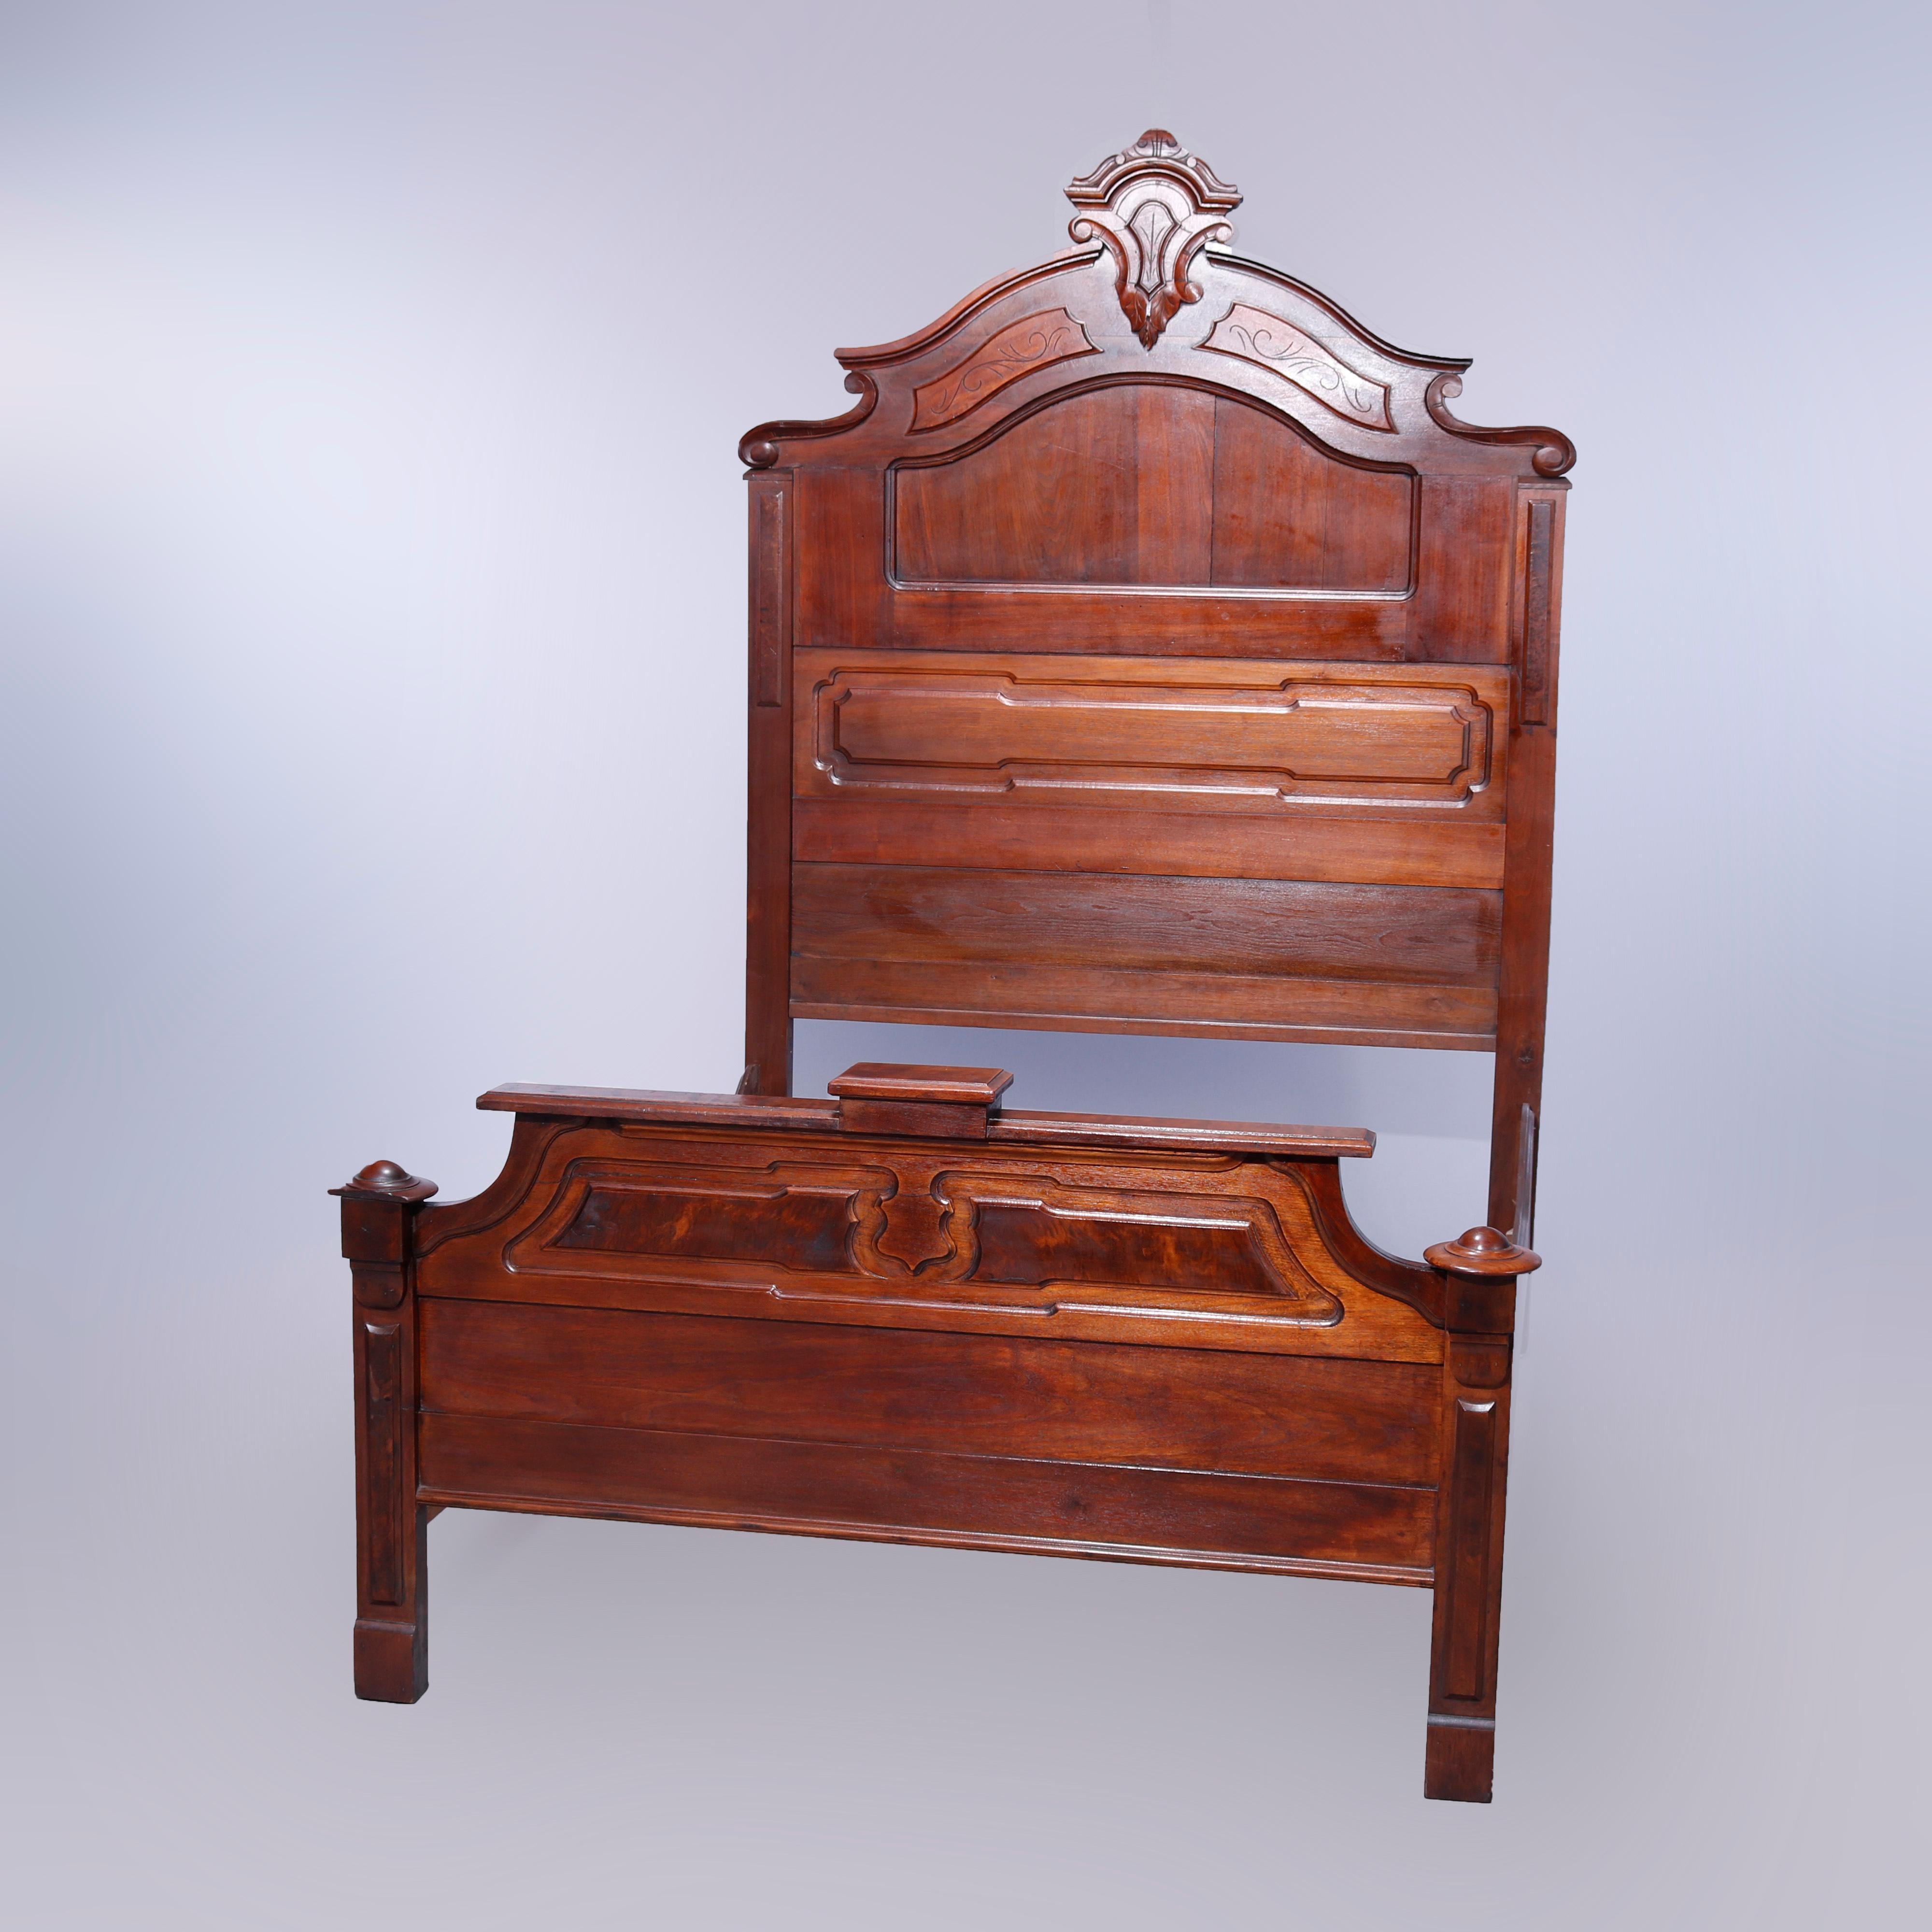 An antique Renaissance Revival high top bed offers walnut paneled construction with burl highlights and shaped headboard having carved shield form cartouche and incised scroll decoration, c1890

Measures- headboard 83.75''h x 57.5''w x 2.5''d;